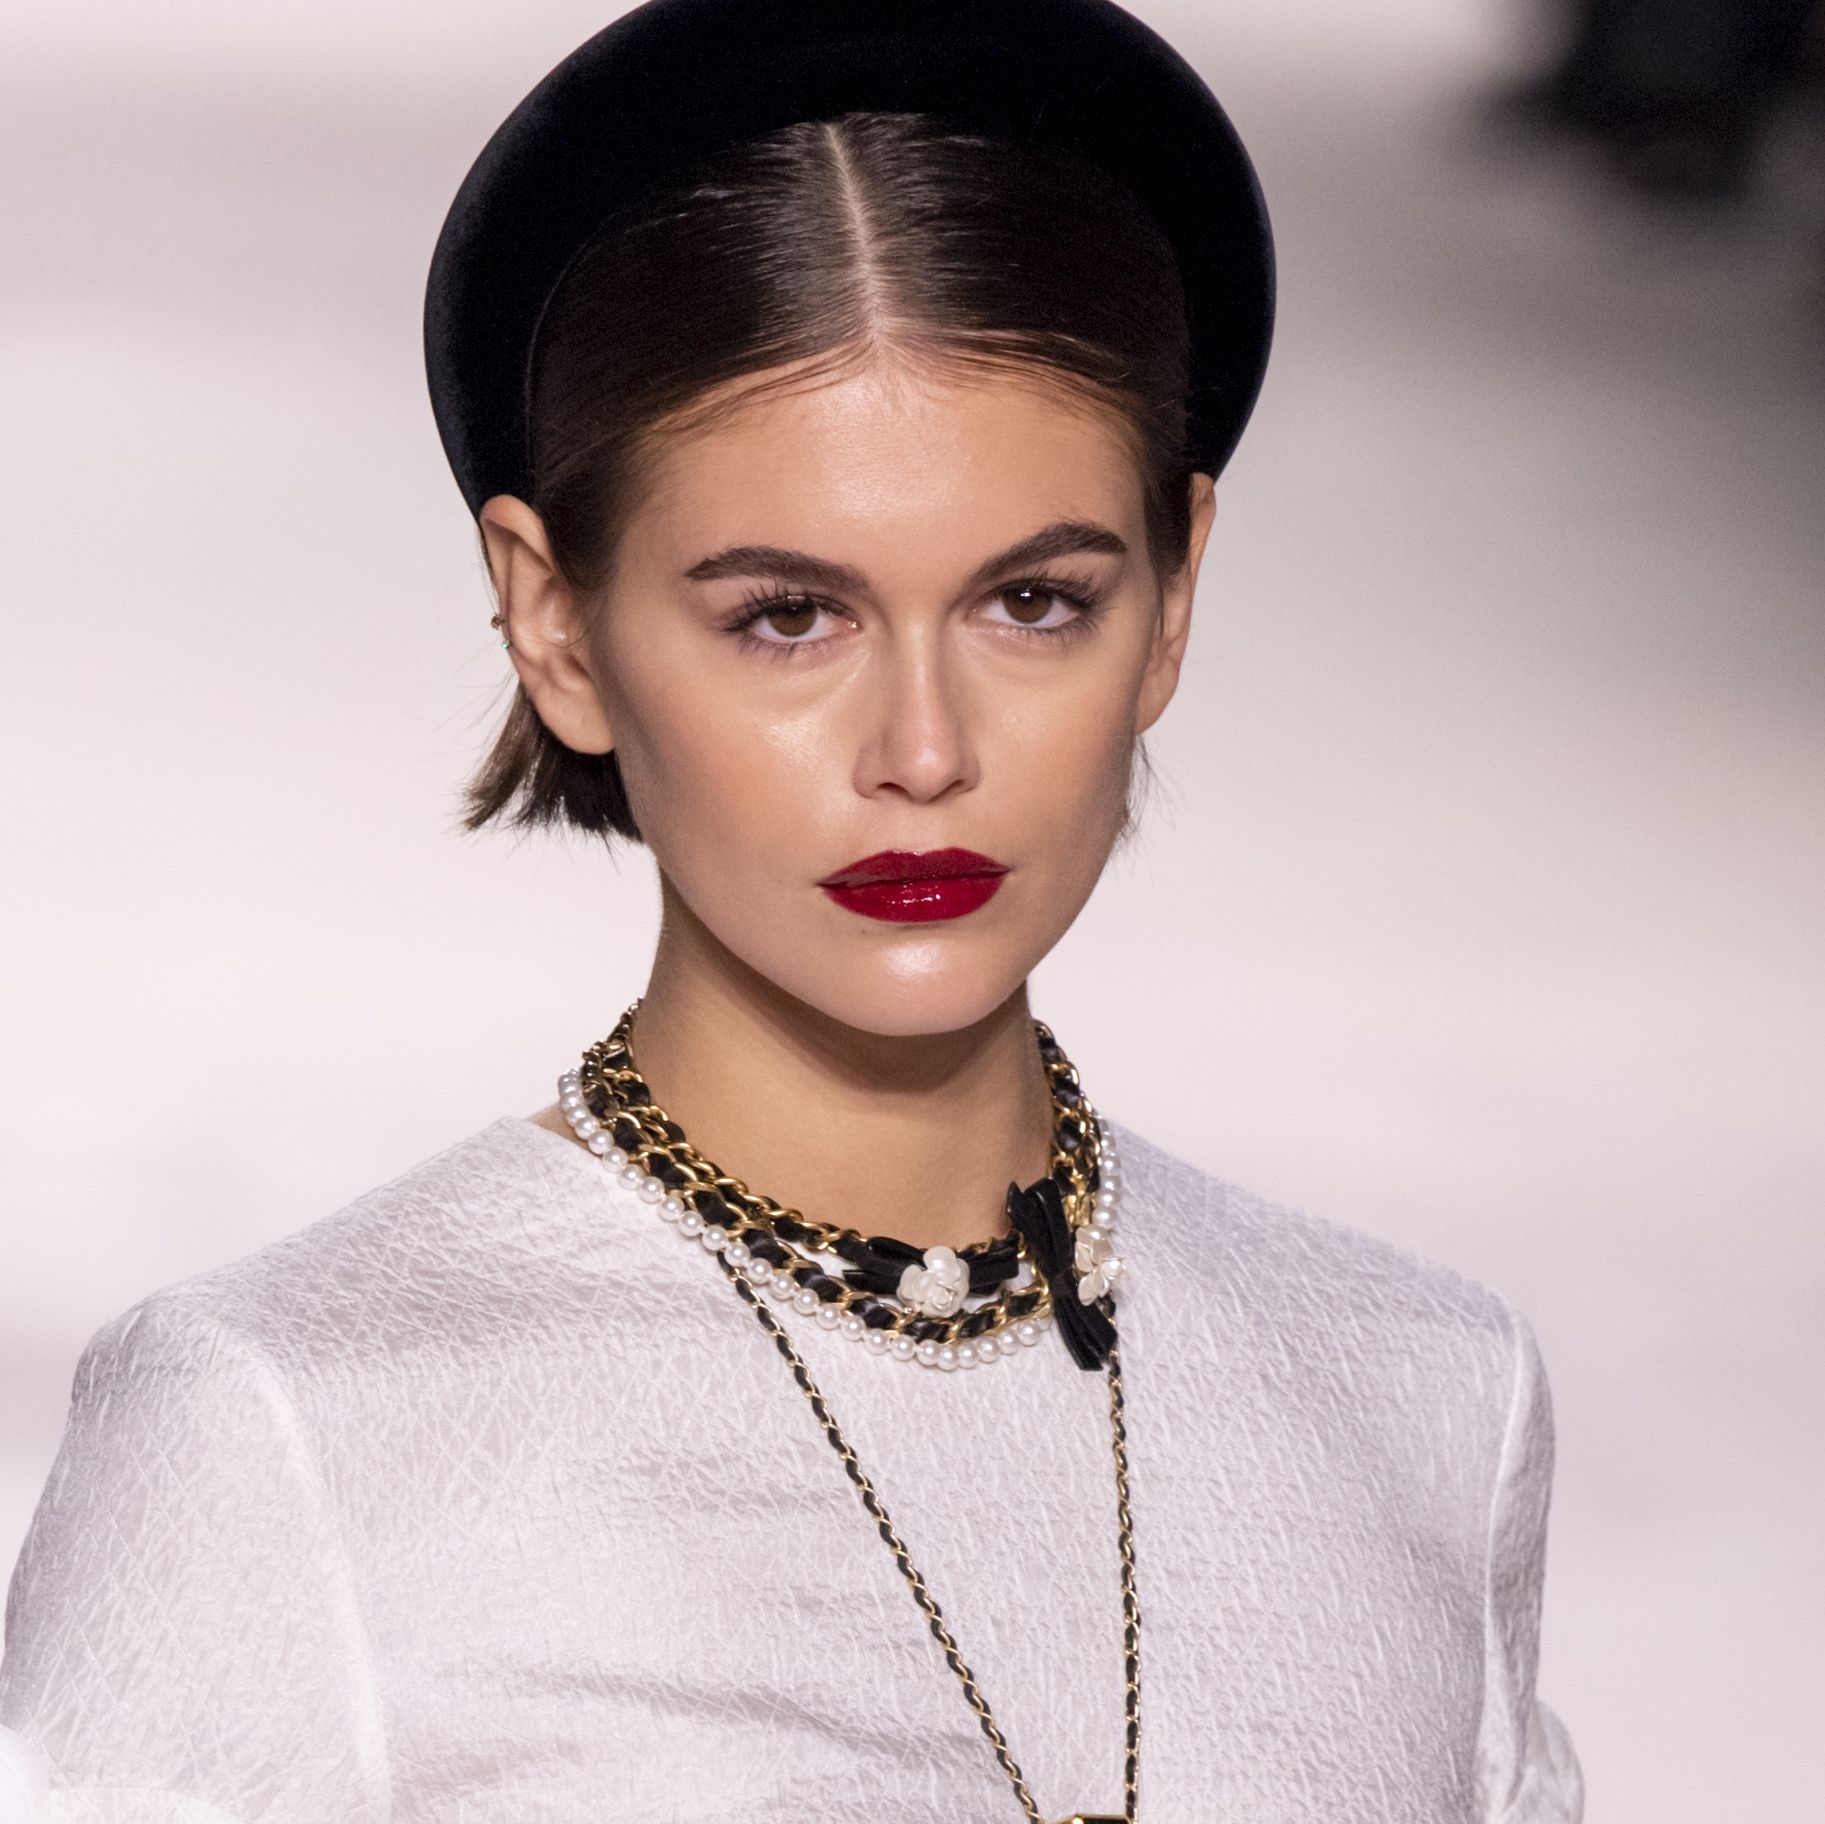 Chanel Métiers d'Art 2019 Hair and Makeup - Fashionista